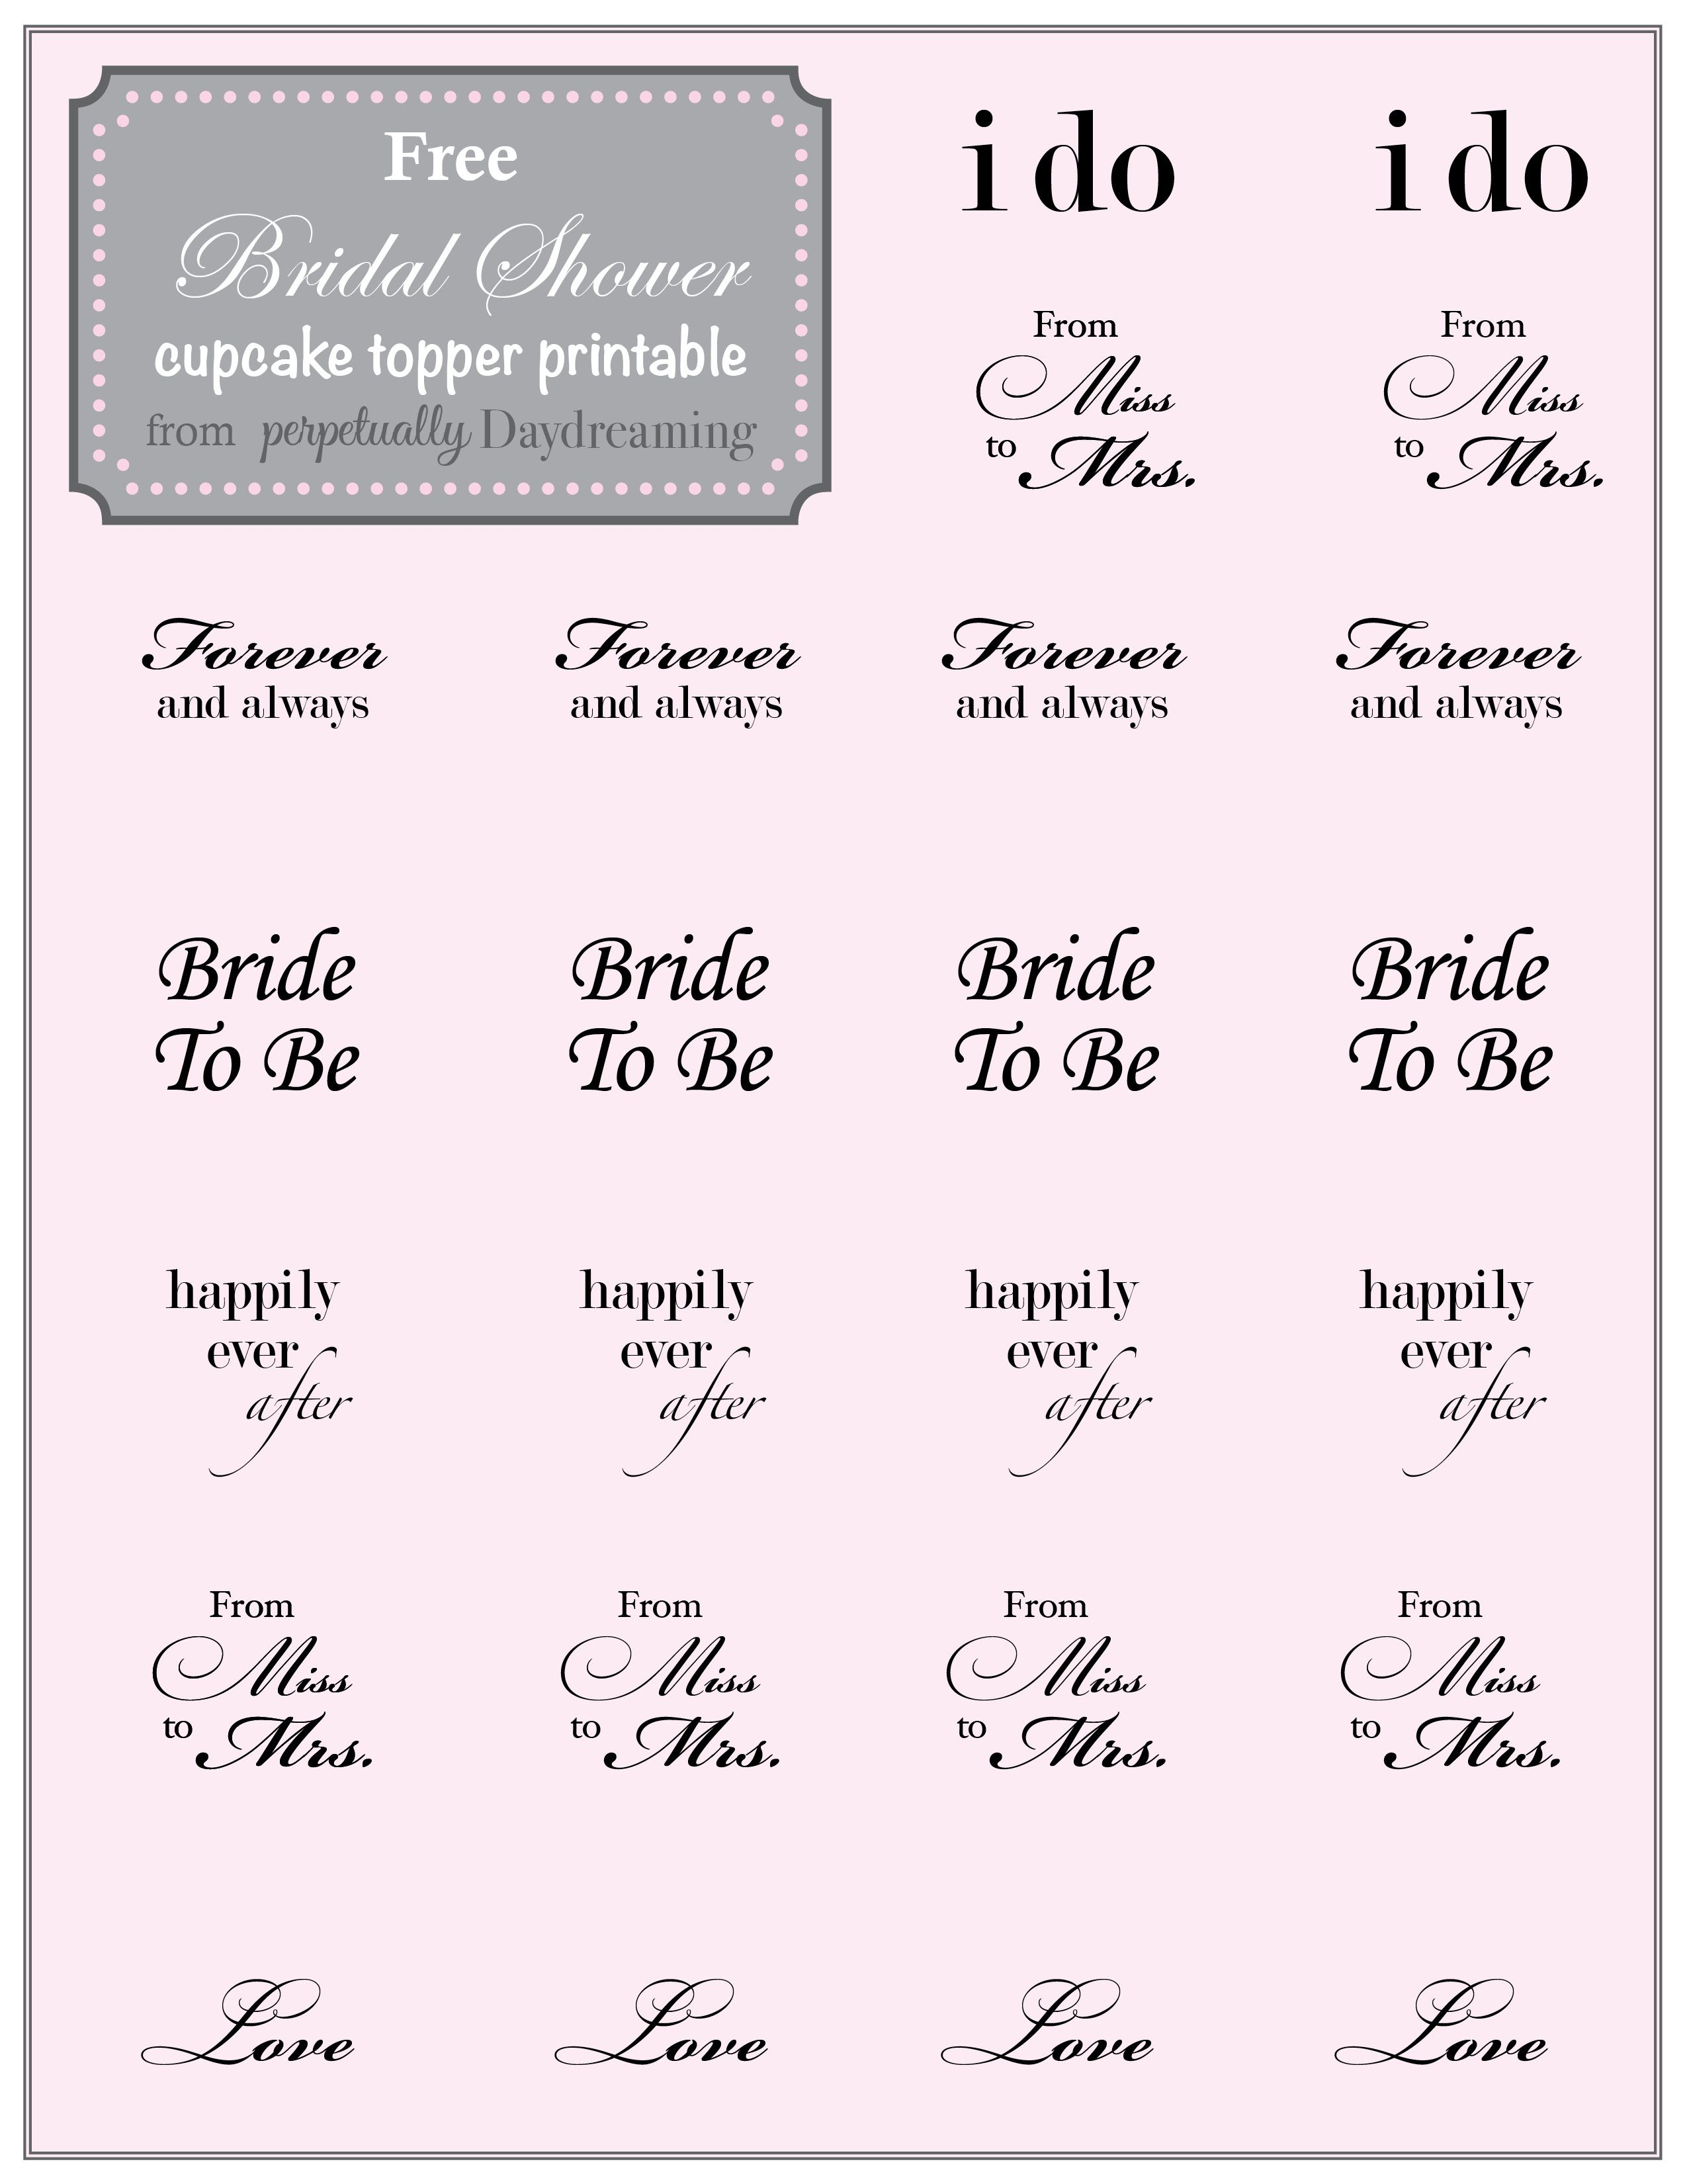 Country Bridal Shower Cupcake Topper {Free} Printable | Perpetually - Free Printable Cupcake Toppers Bridal Shower